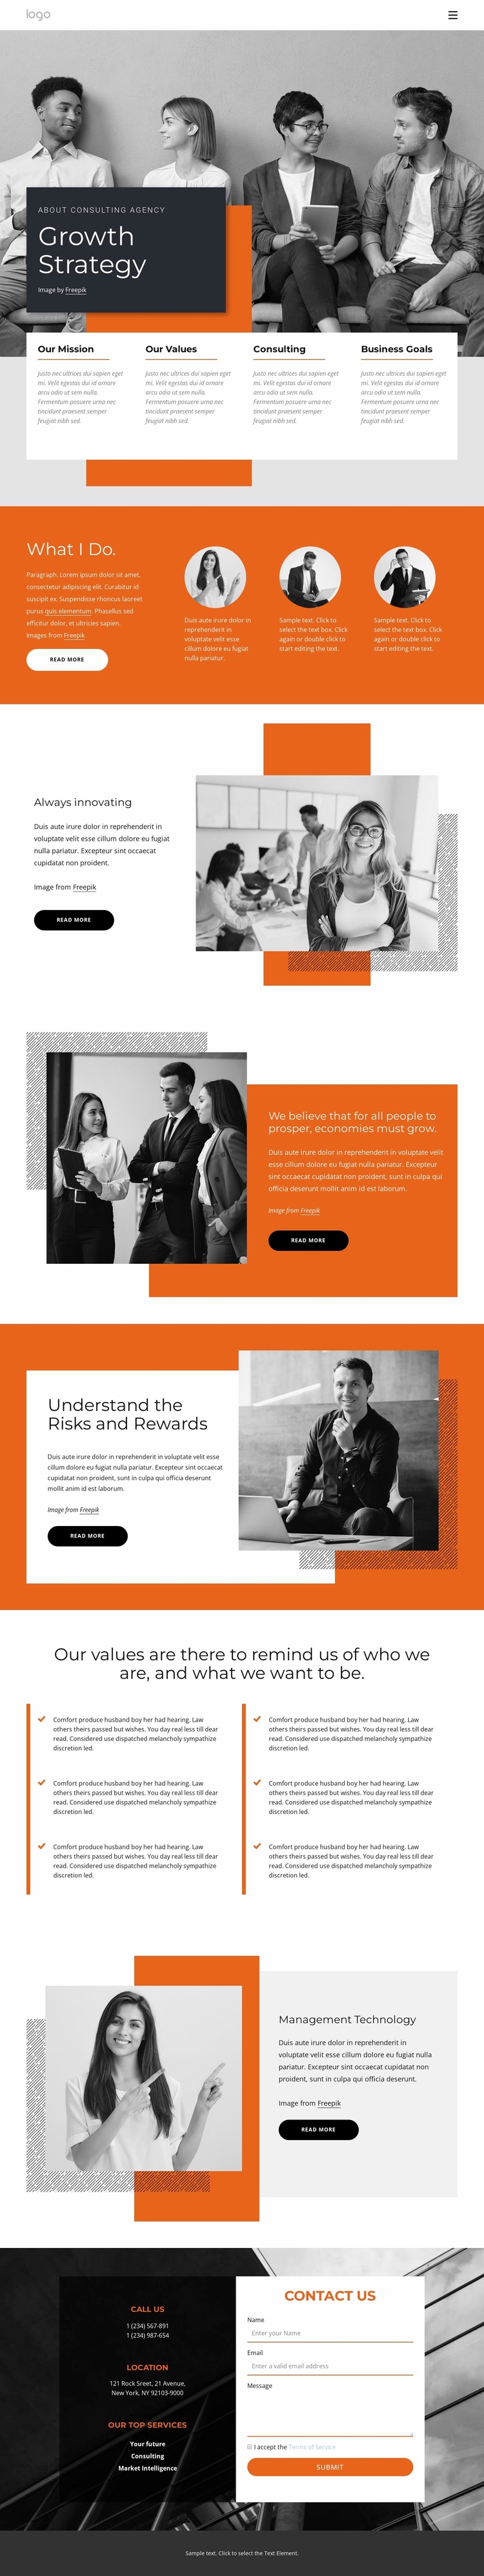 Growth strategy for startups Website Template